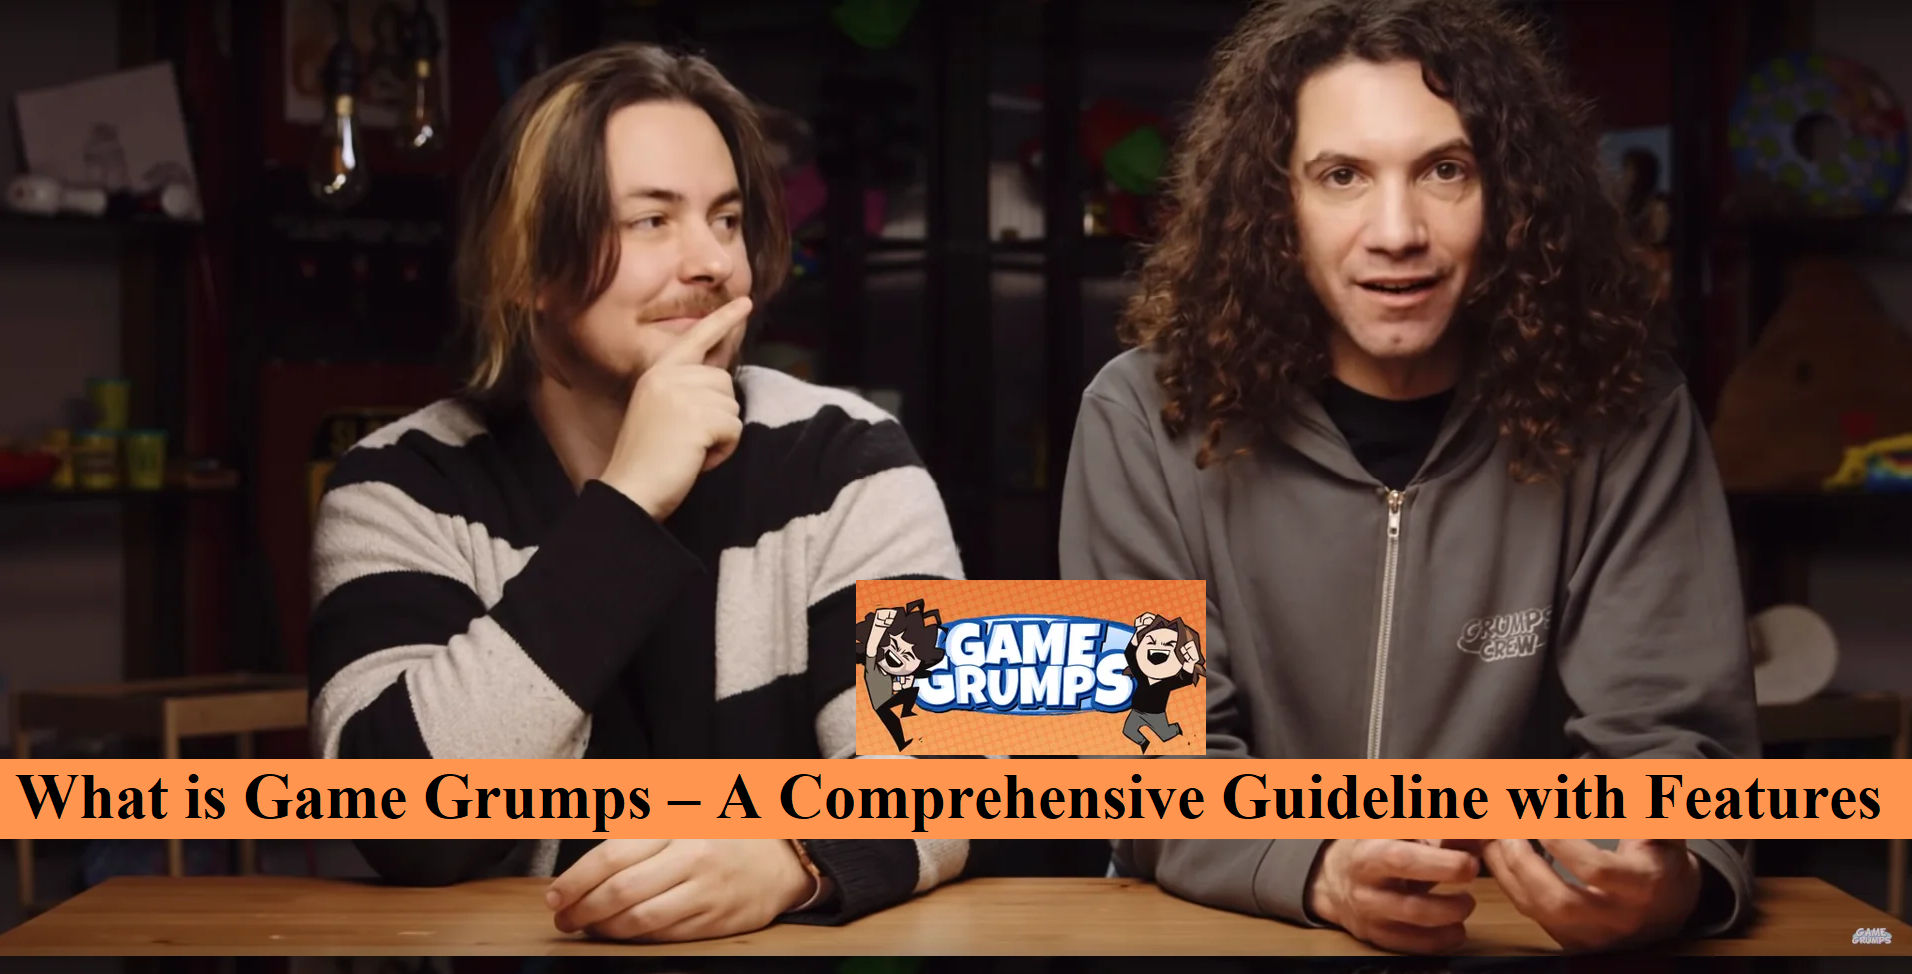 What is Game Grumps – A Comprehensive Guideline with Features